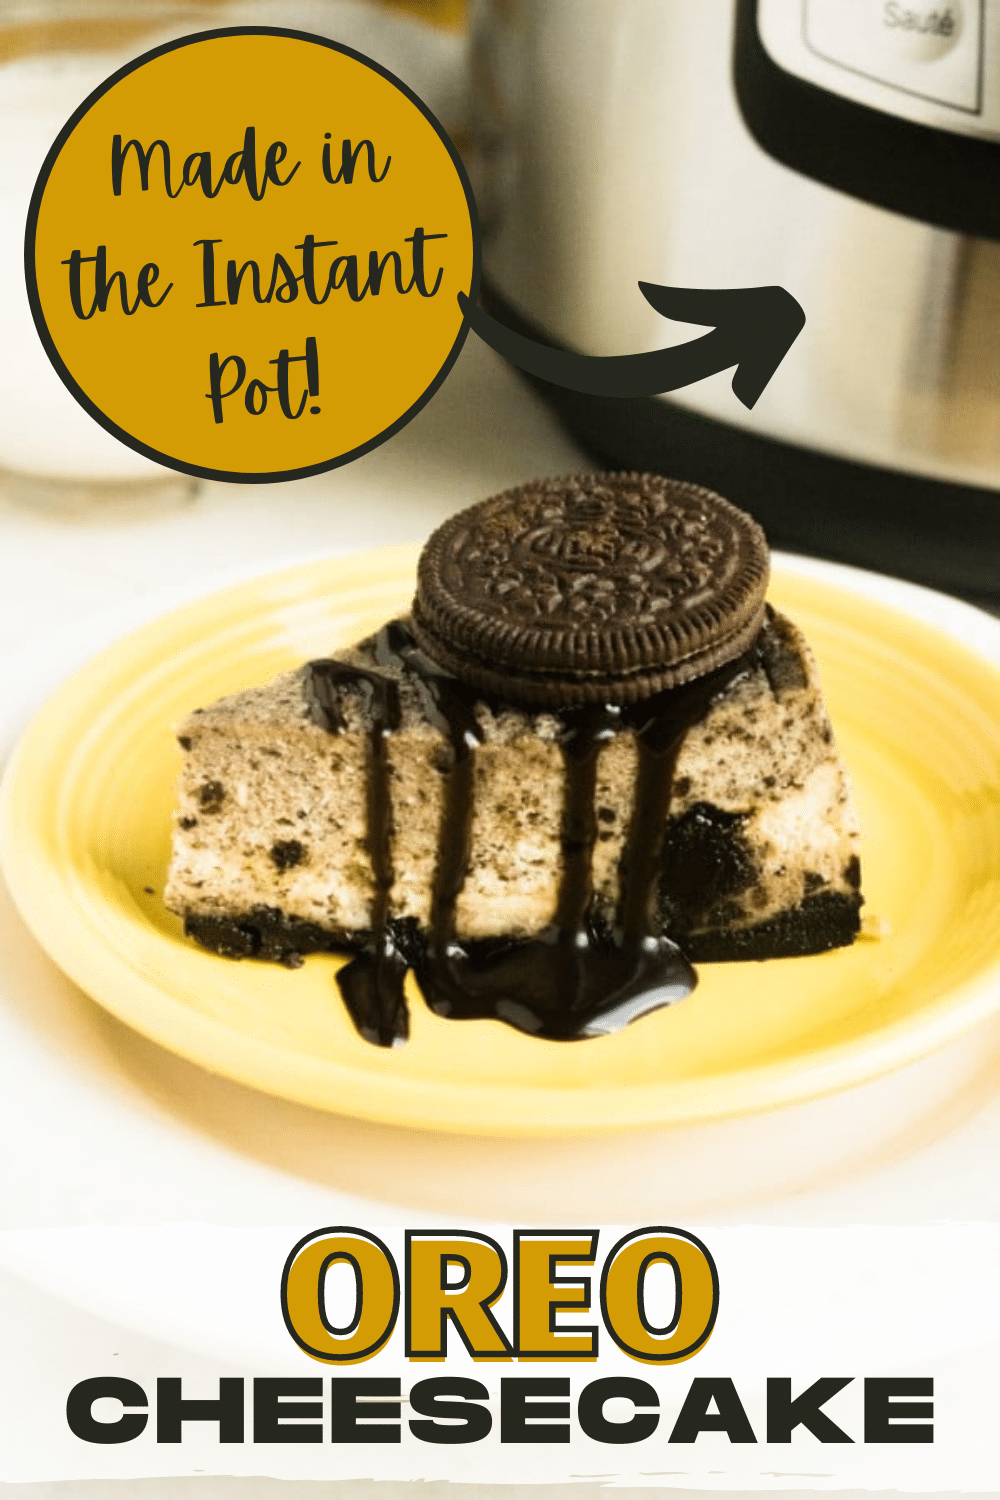 Many people love to have a delicious dessert to serve as the finale to their meals. This Instant Pot Oreo Cheesecake provides the perfect end to a wonderful dinner. #instantpot #pressurecooker #cheesecake #dessert via @wondermomwannab